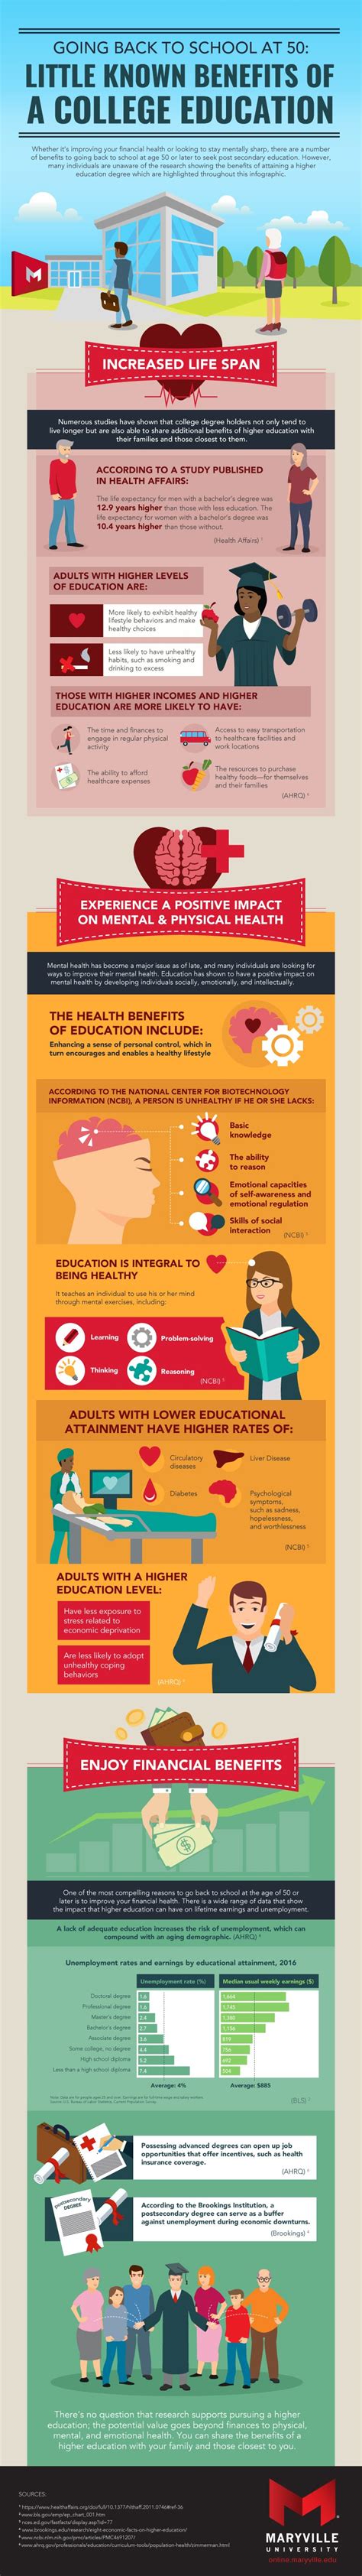 going back to school at 50 little known benefits of a college education infographic visualistan